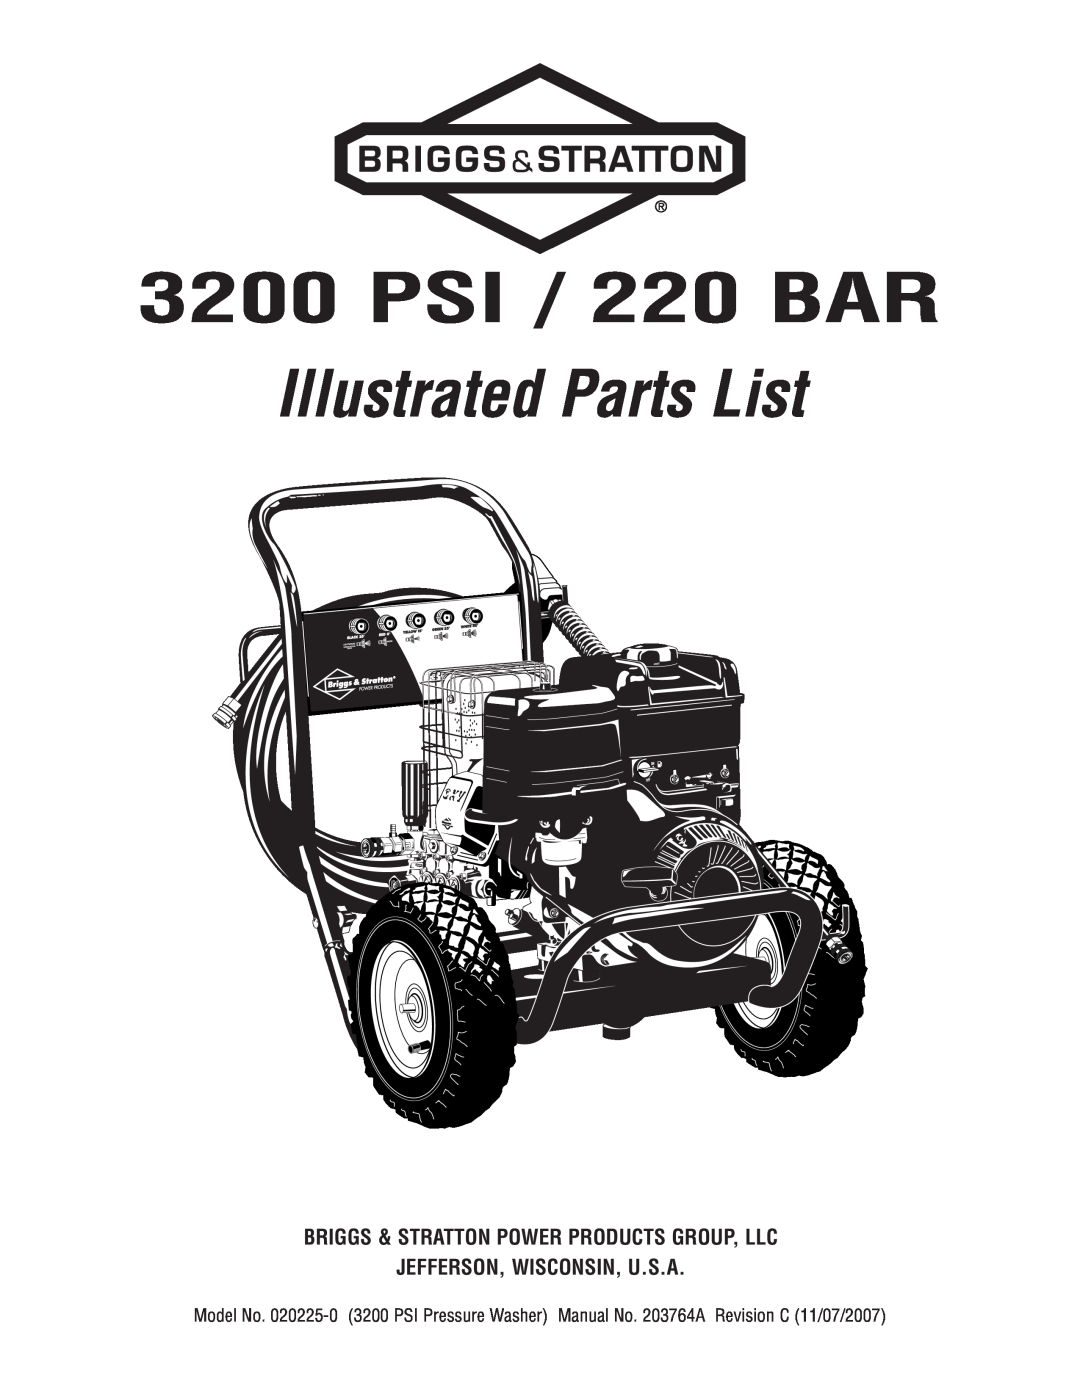 Briggs & Stratton 020225-0 manual PSI / 220 BAR, Illustrated Parts List, Briggs & Stratton Power Products Group, Llc 